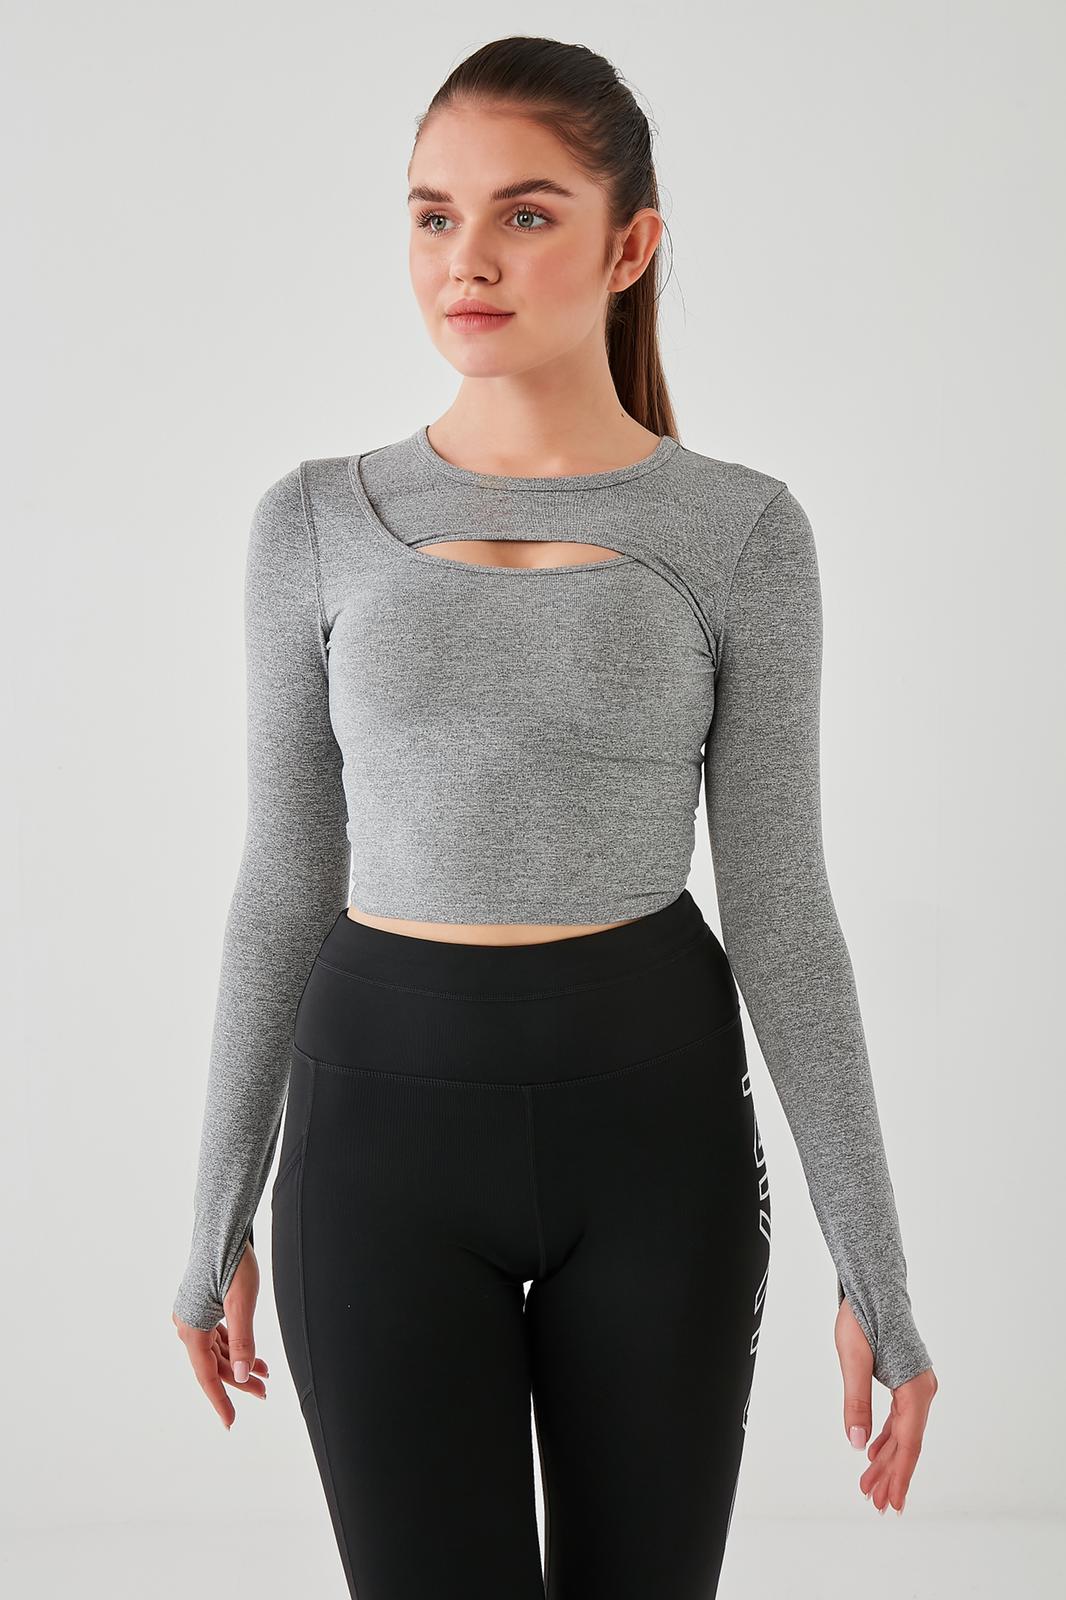  workout in style crop top